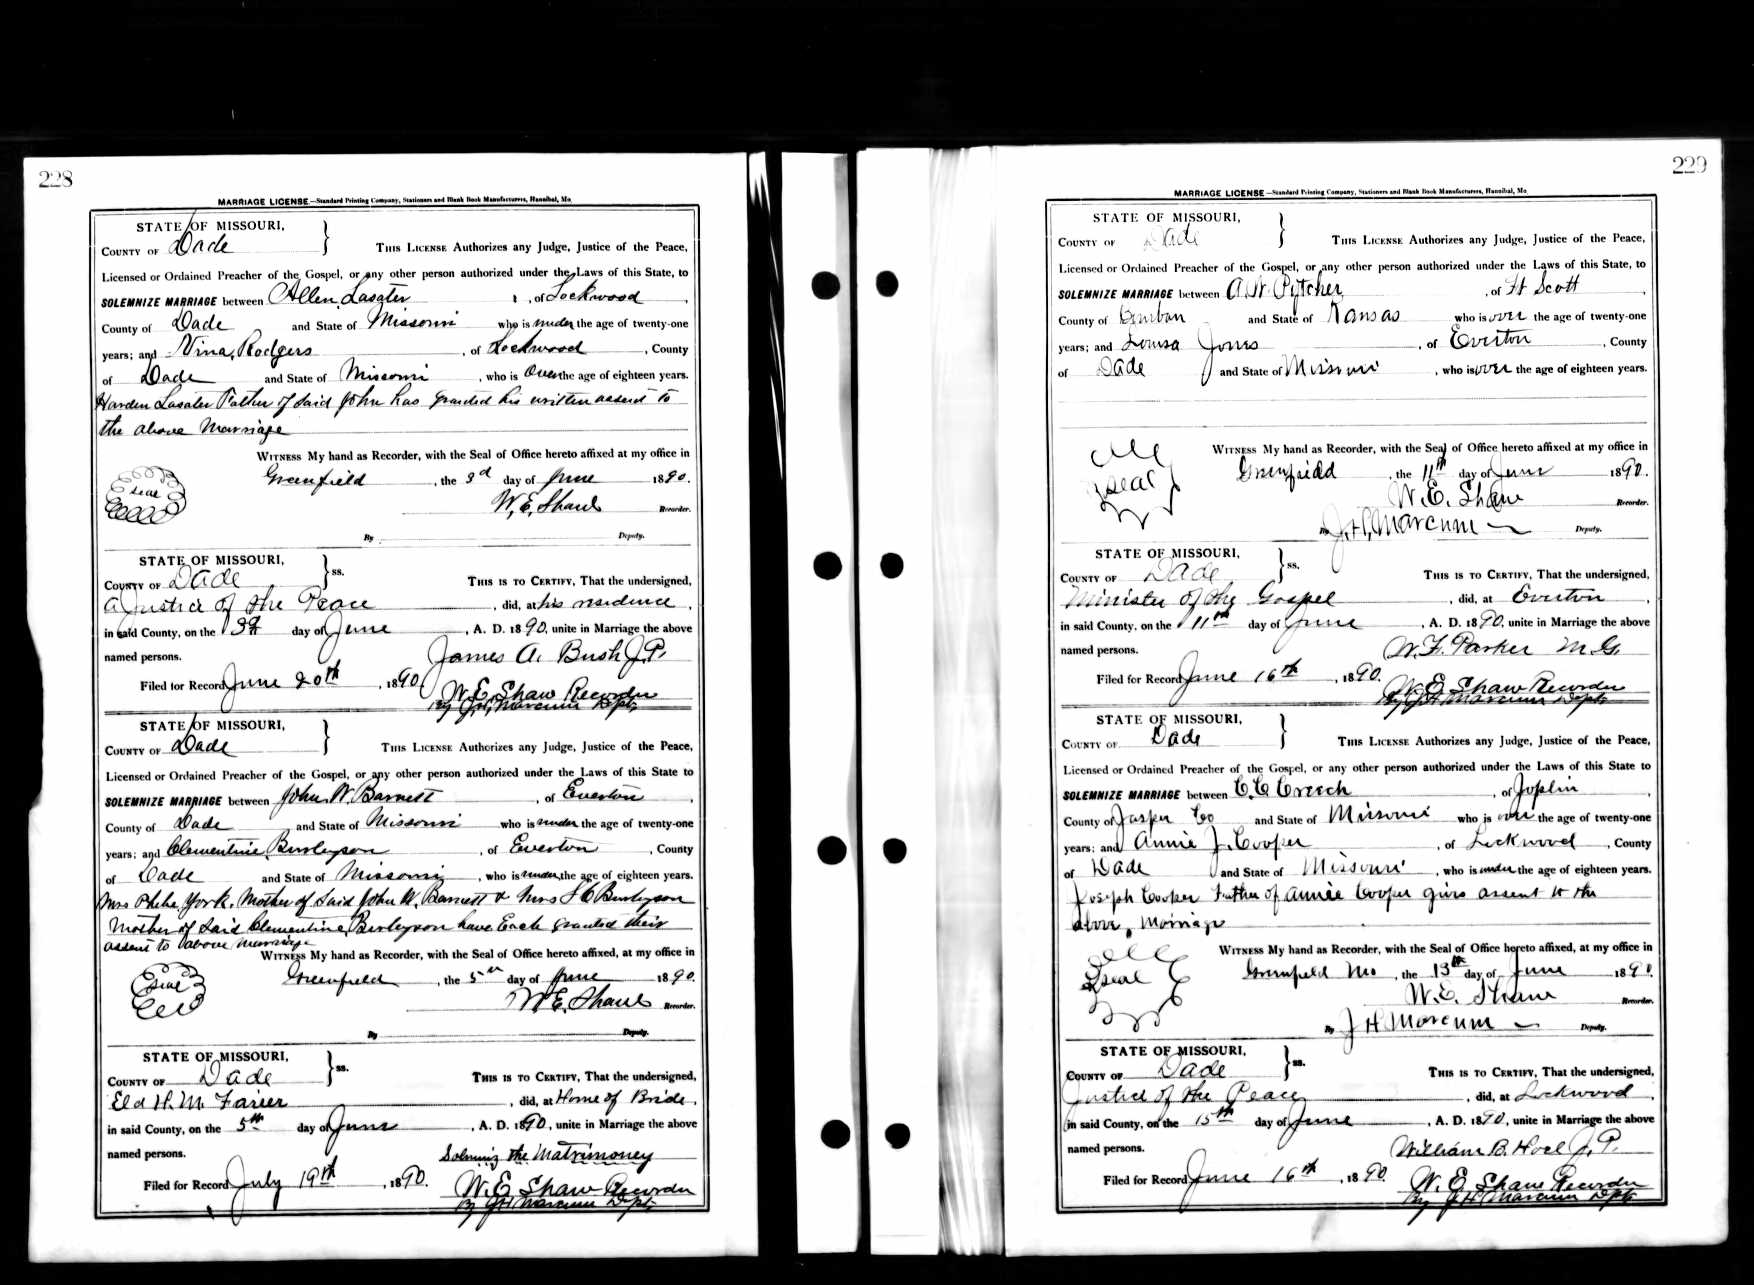 Allen S. Lasater, marriage to Vina Rodgers, 1890, Dade County, Missouri